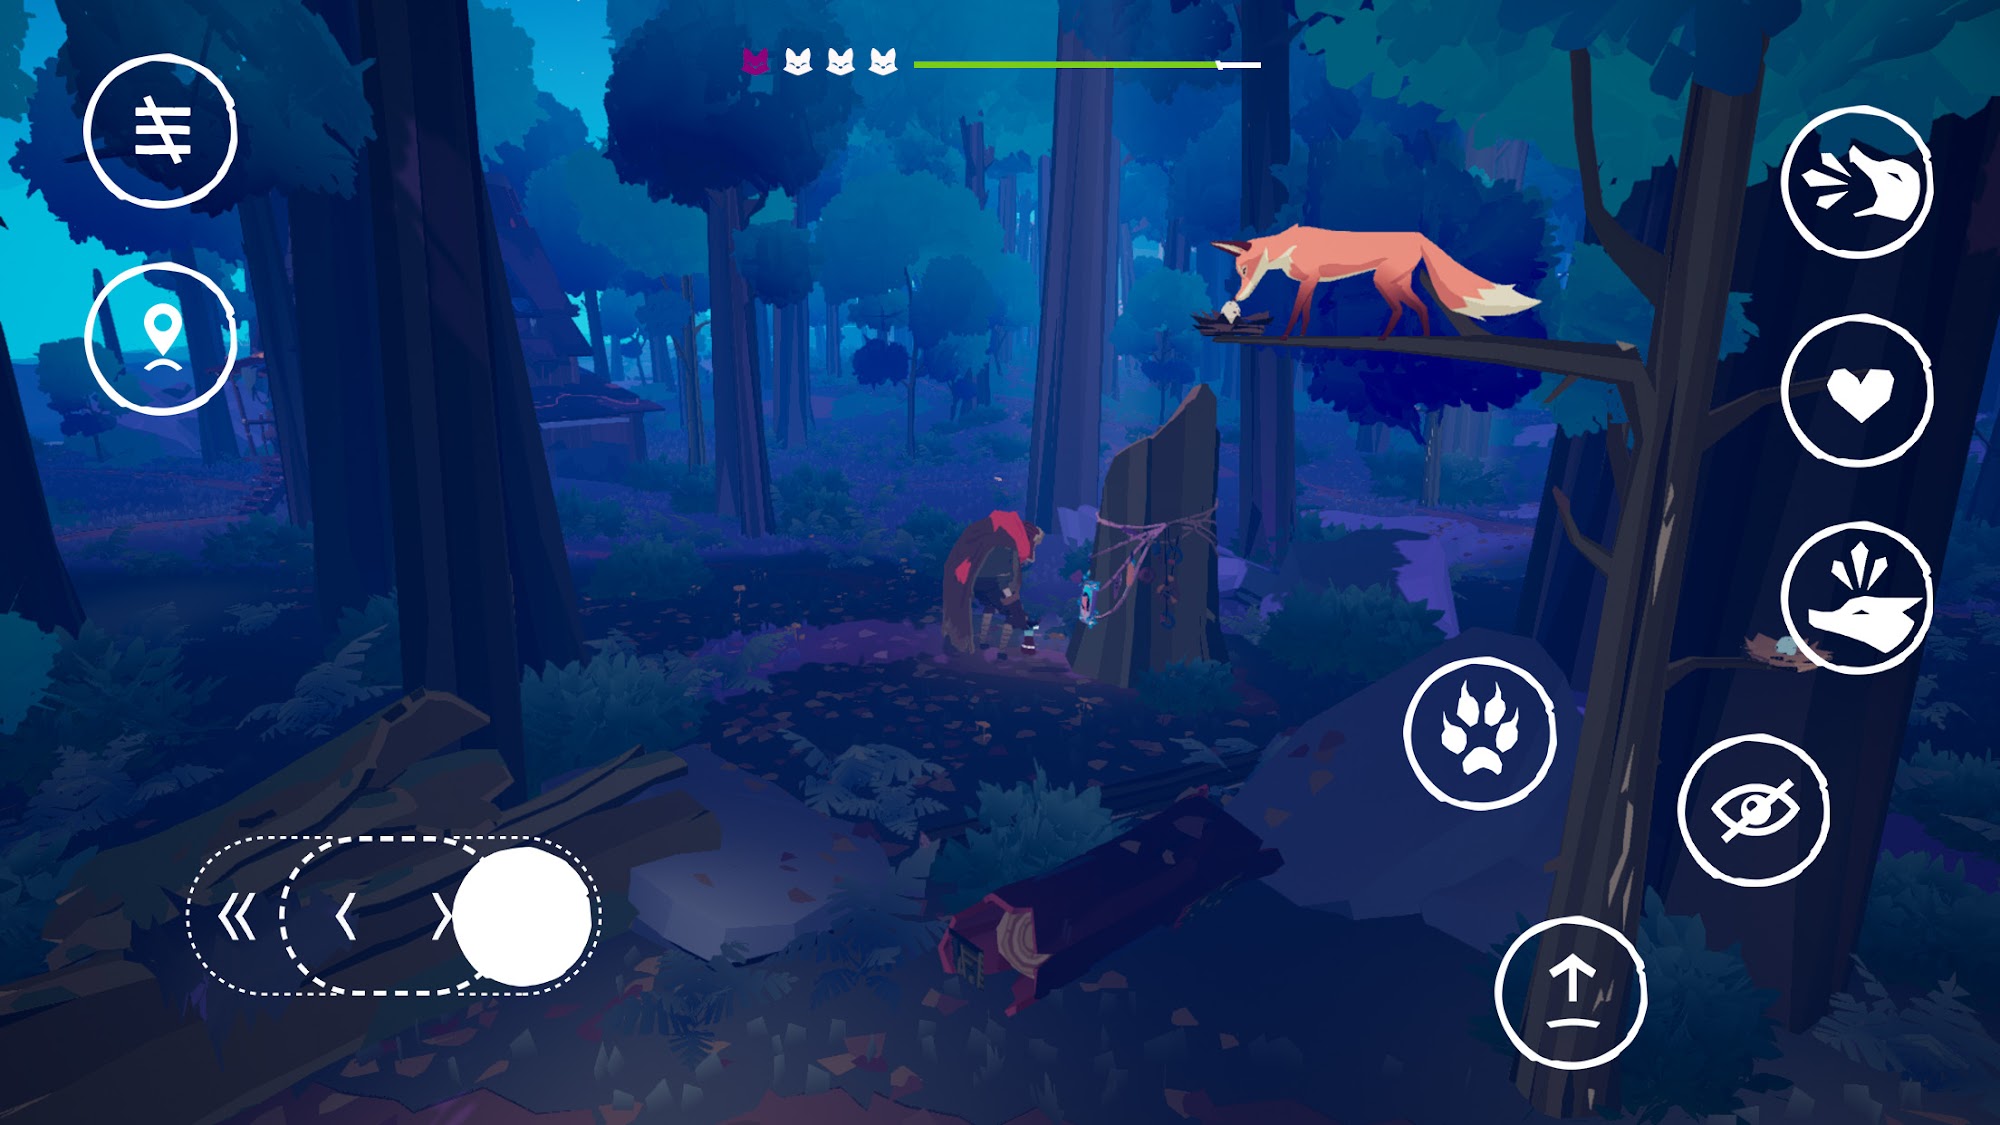 Endling *Extinction is Forever - Android game screenshots.